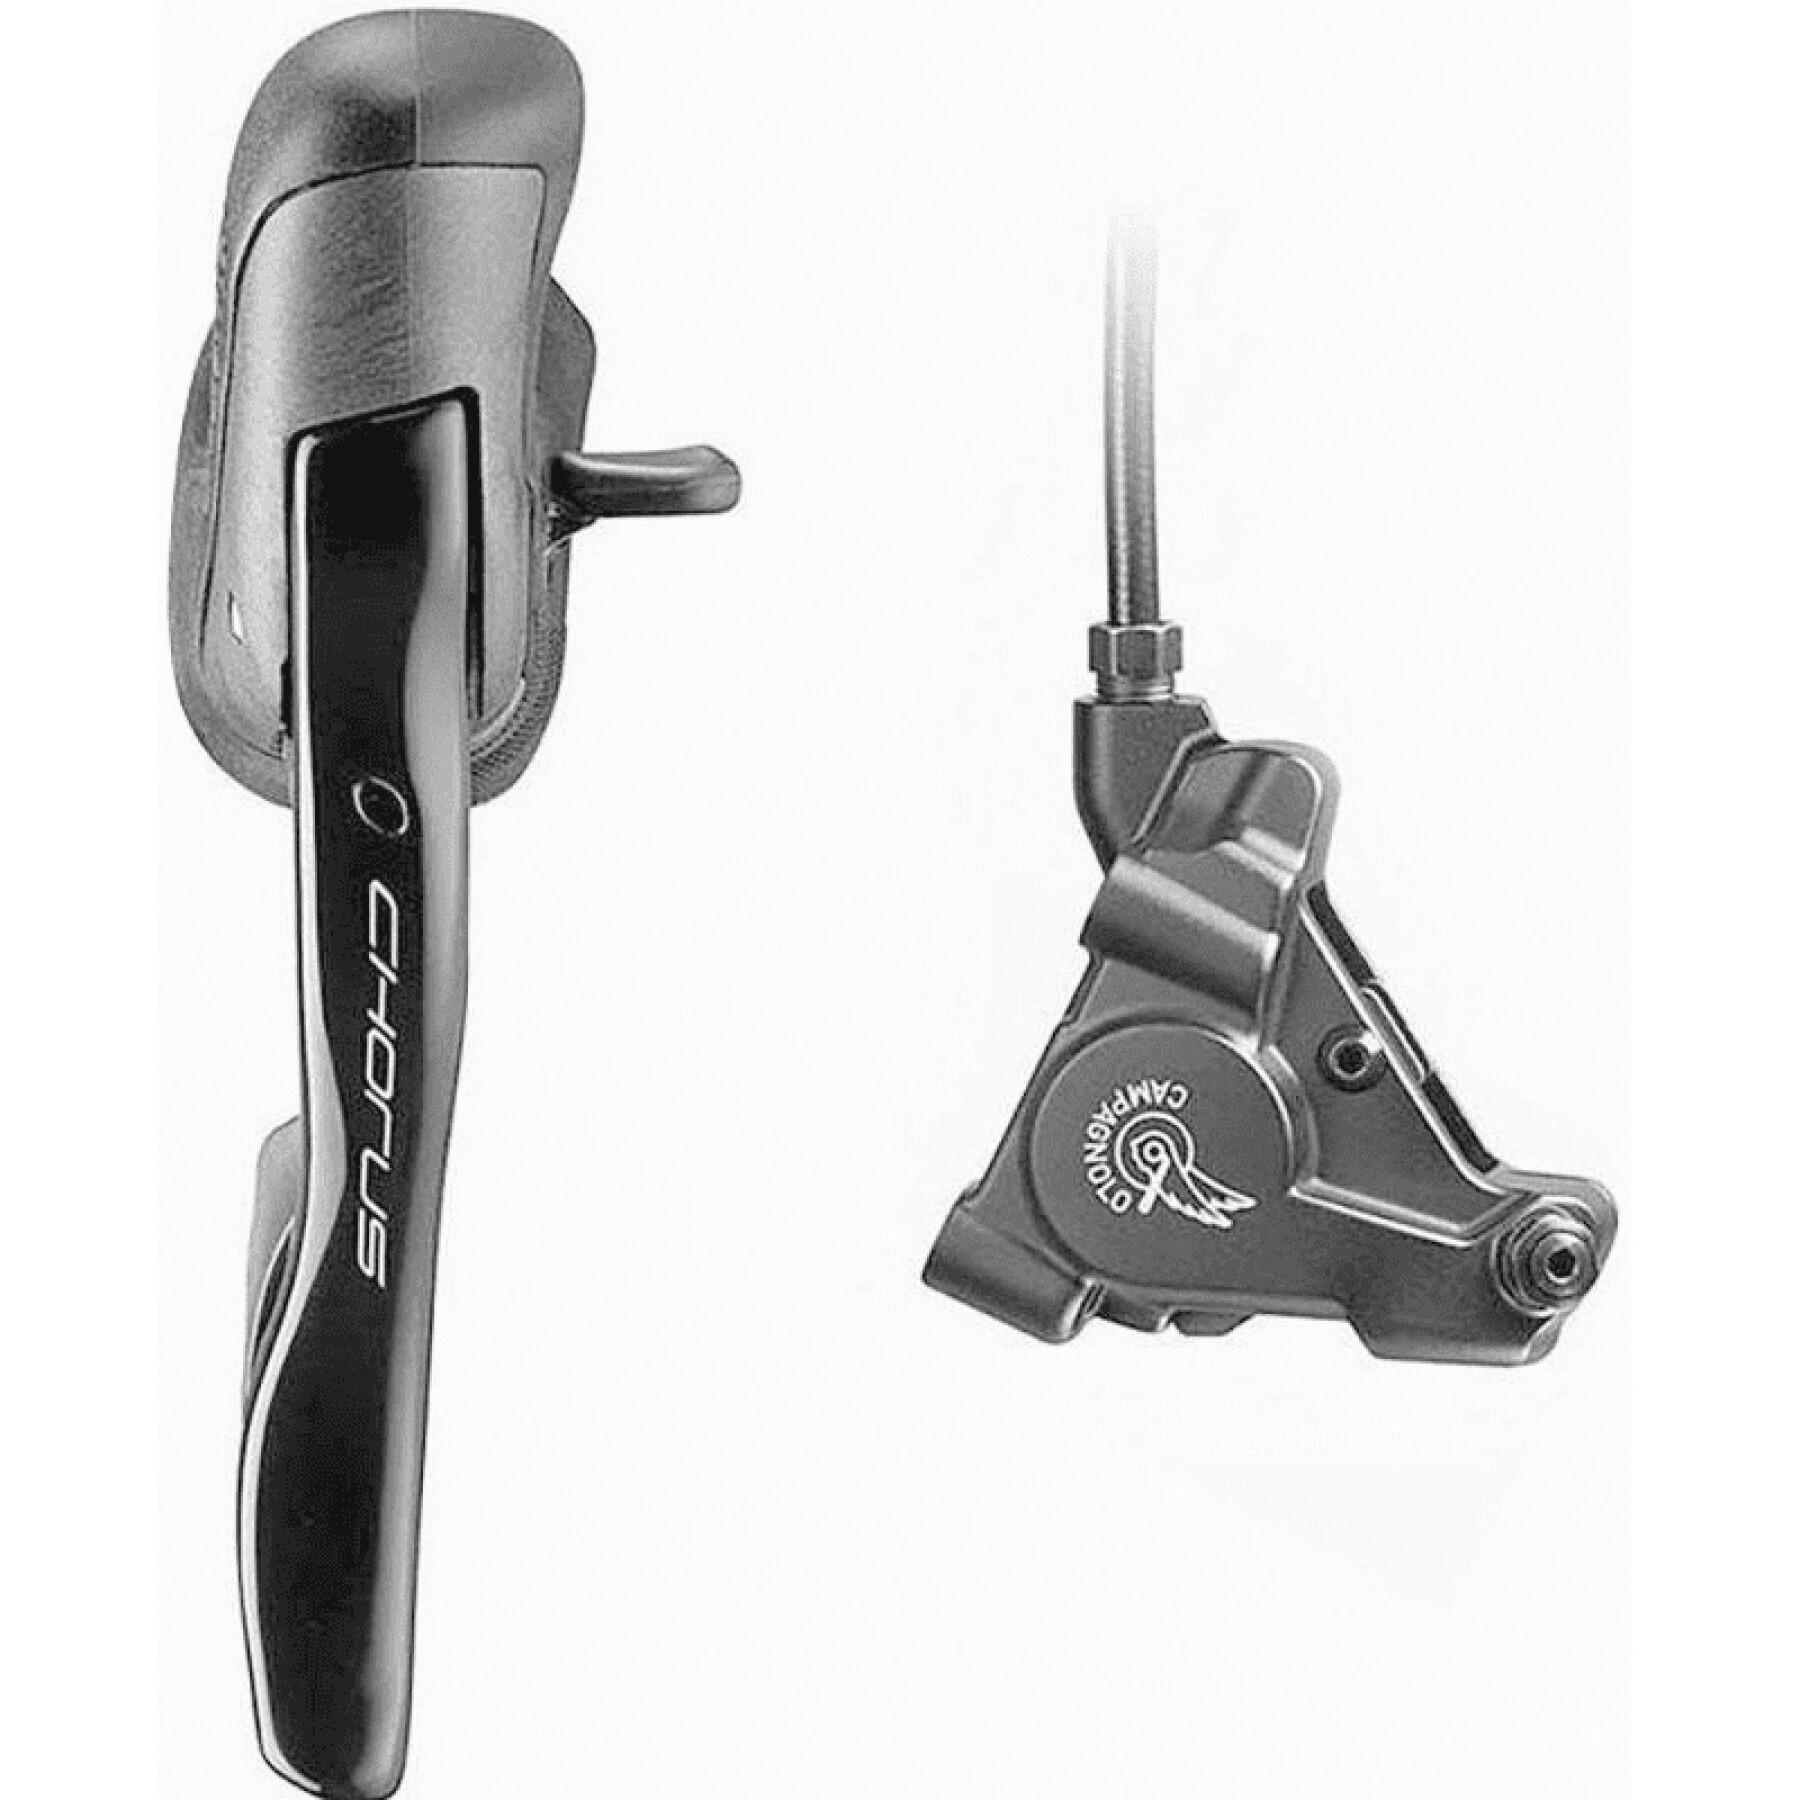 Left brake lever and rear derailleur Campagnolo super record eps hydr.2v 140 mm pince av flat mount